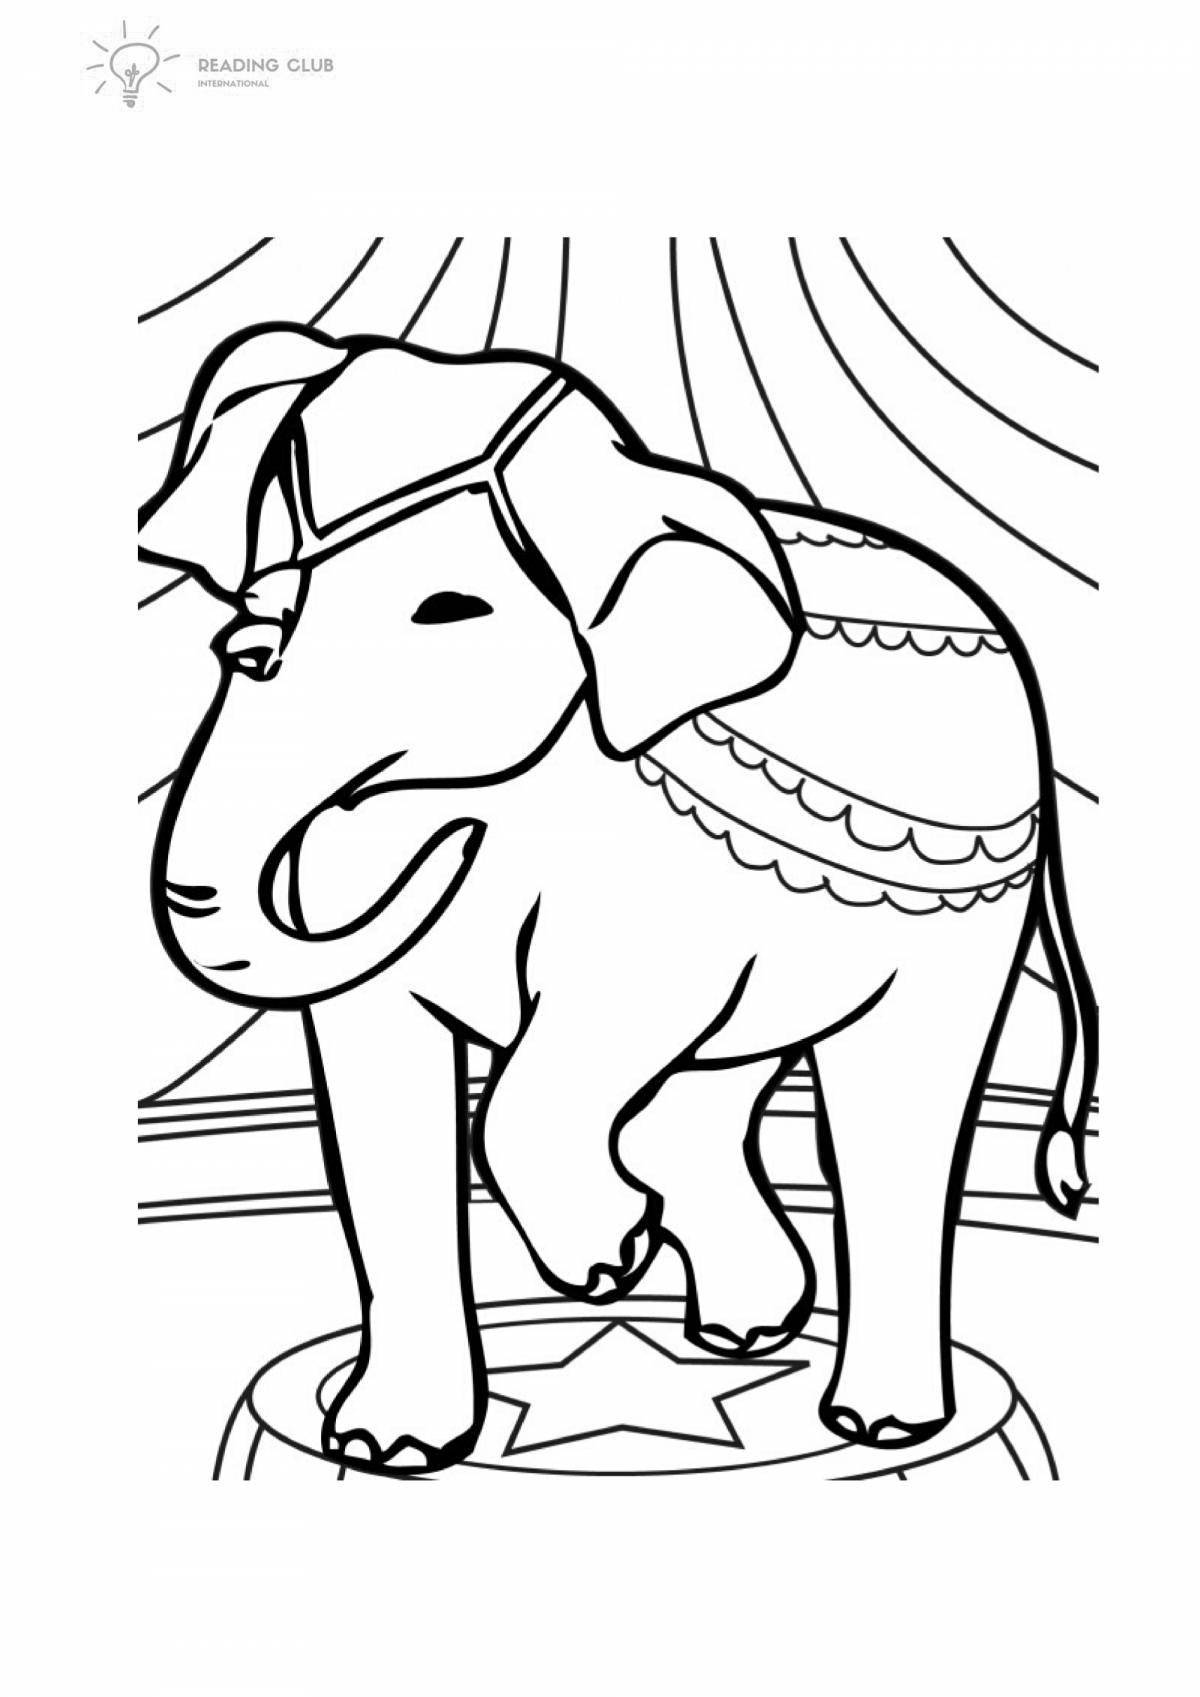 Charming elephant coloring book